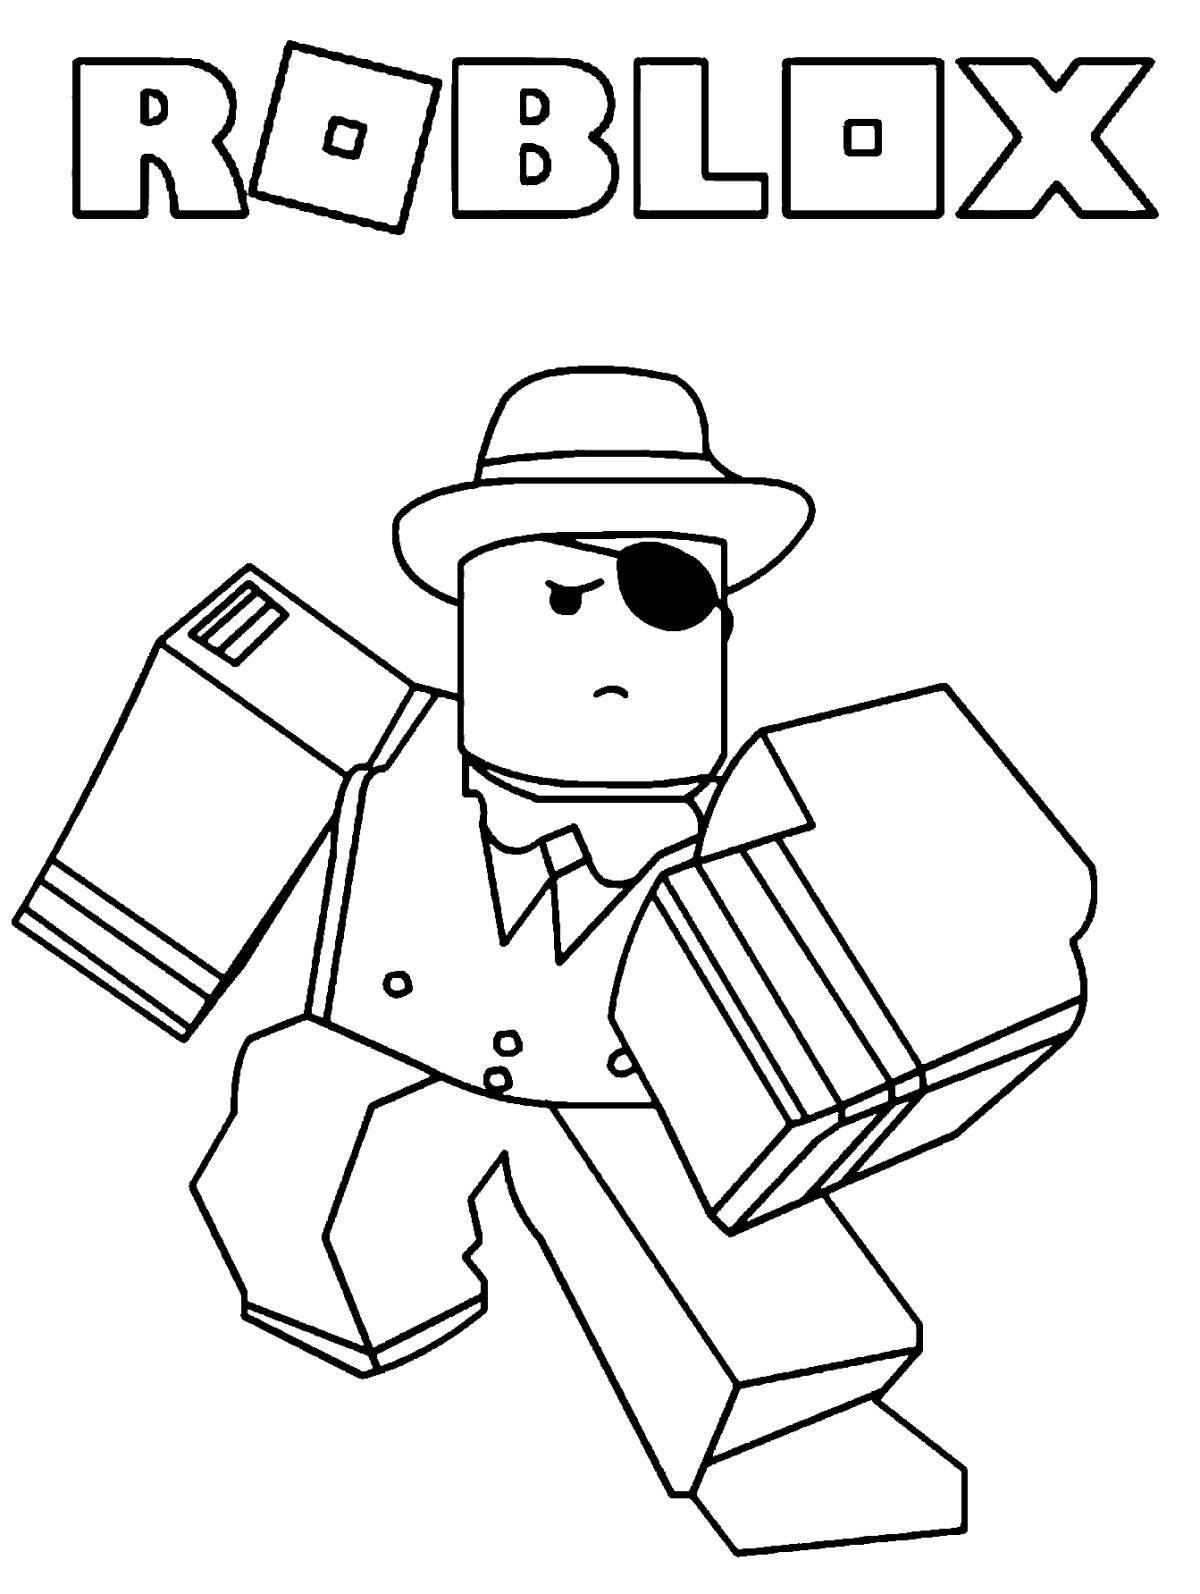 Awesome roblox kp coloring page